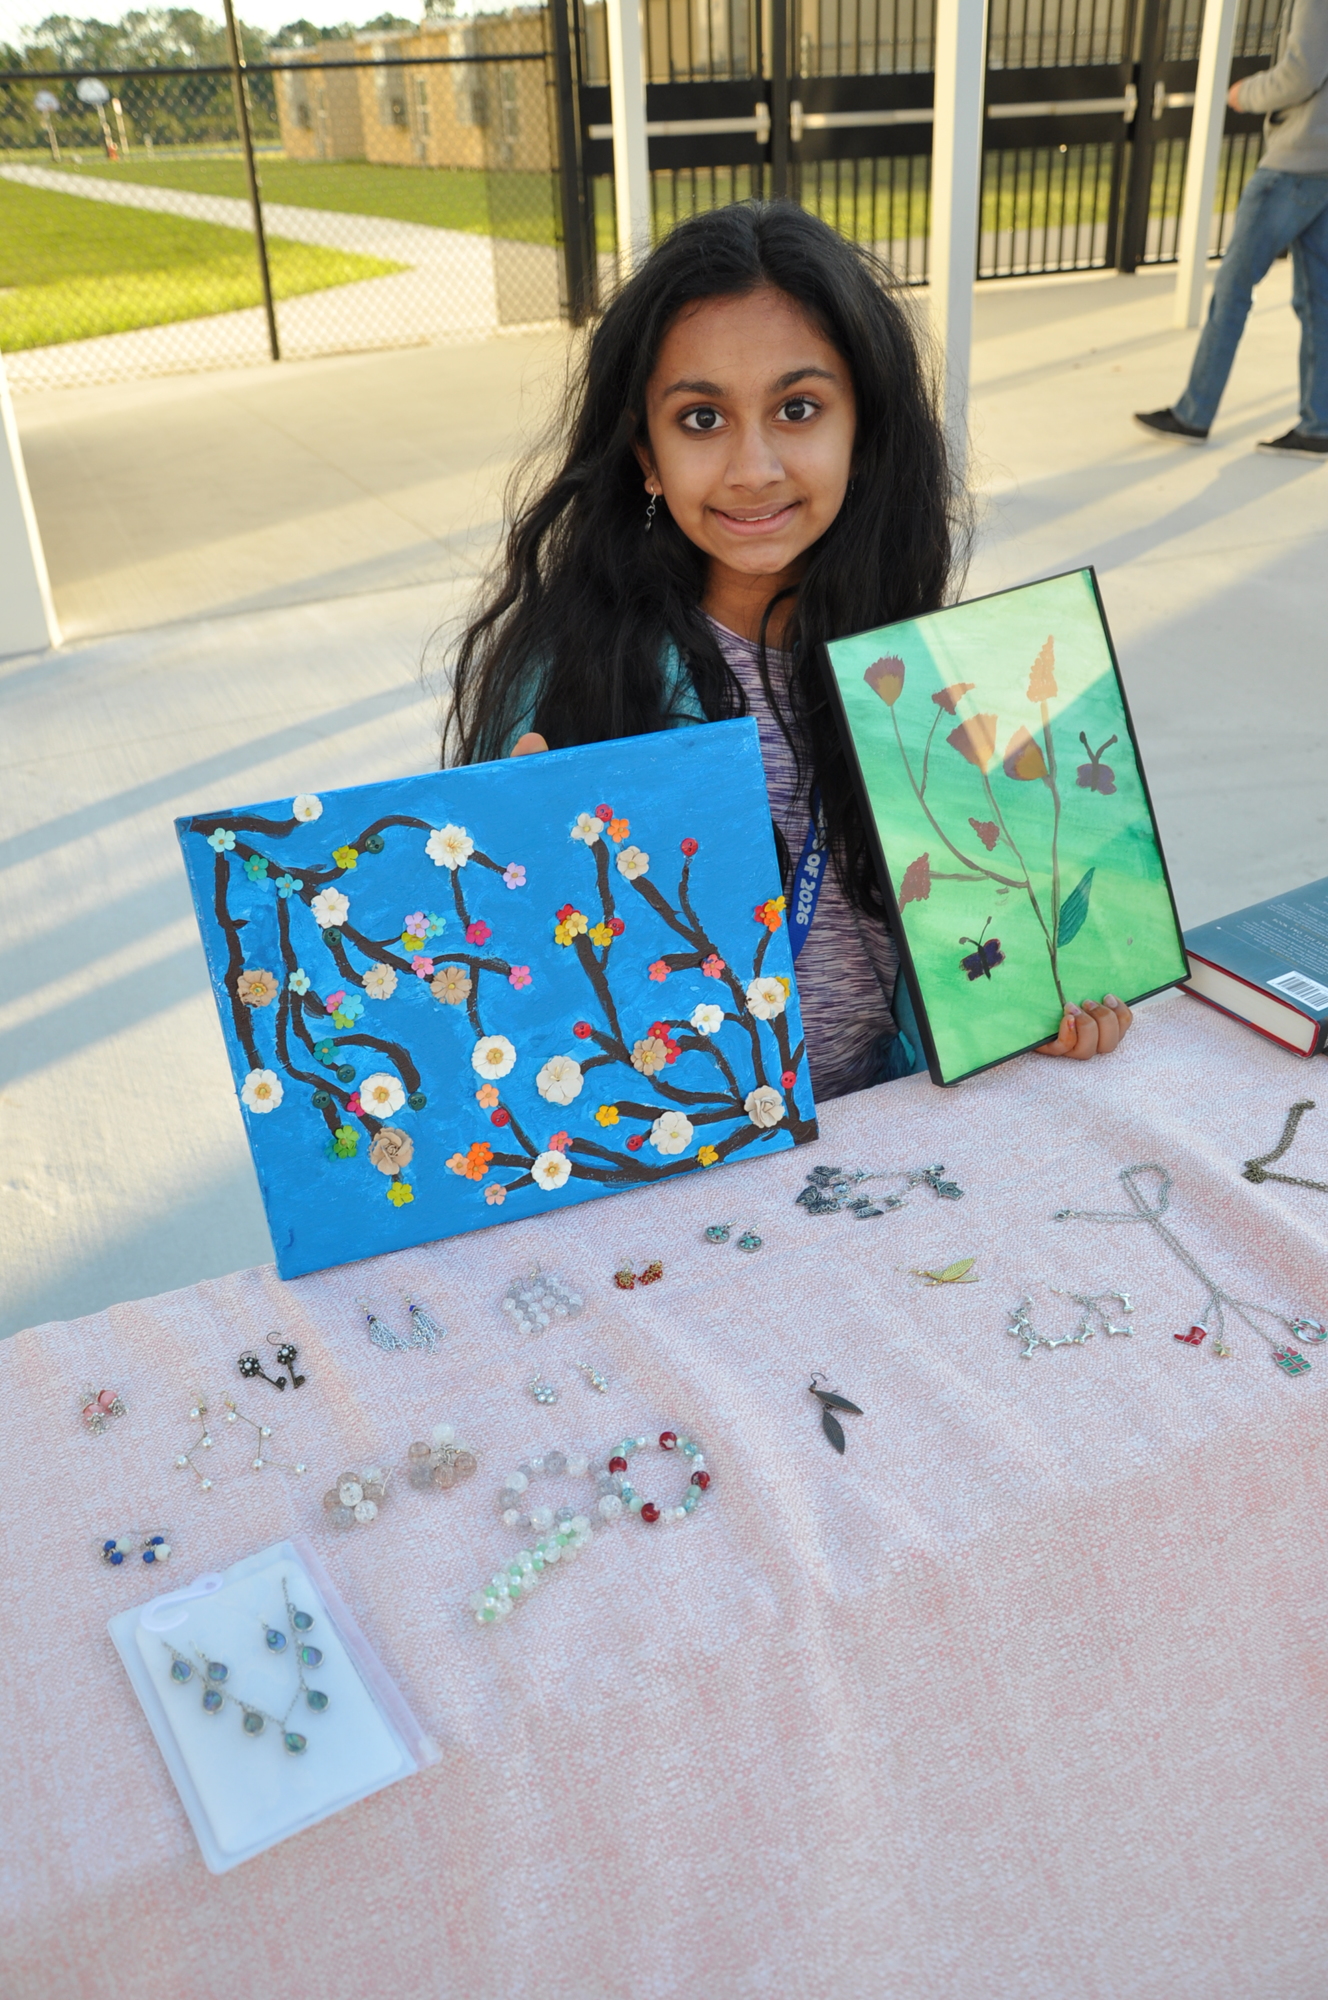 Dhanya Rao sold her artwork and jewelry at the event.